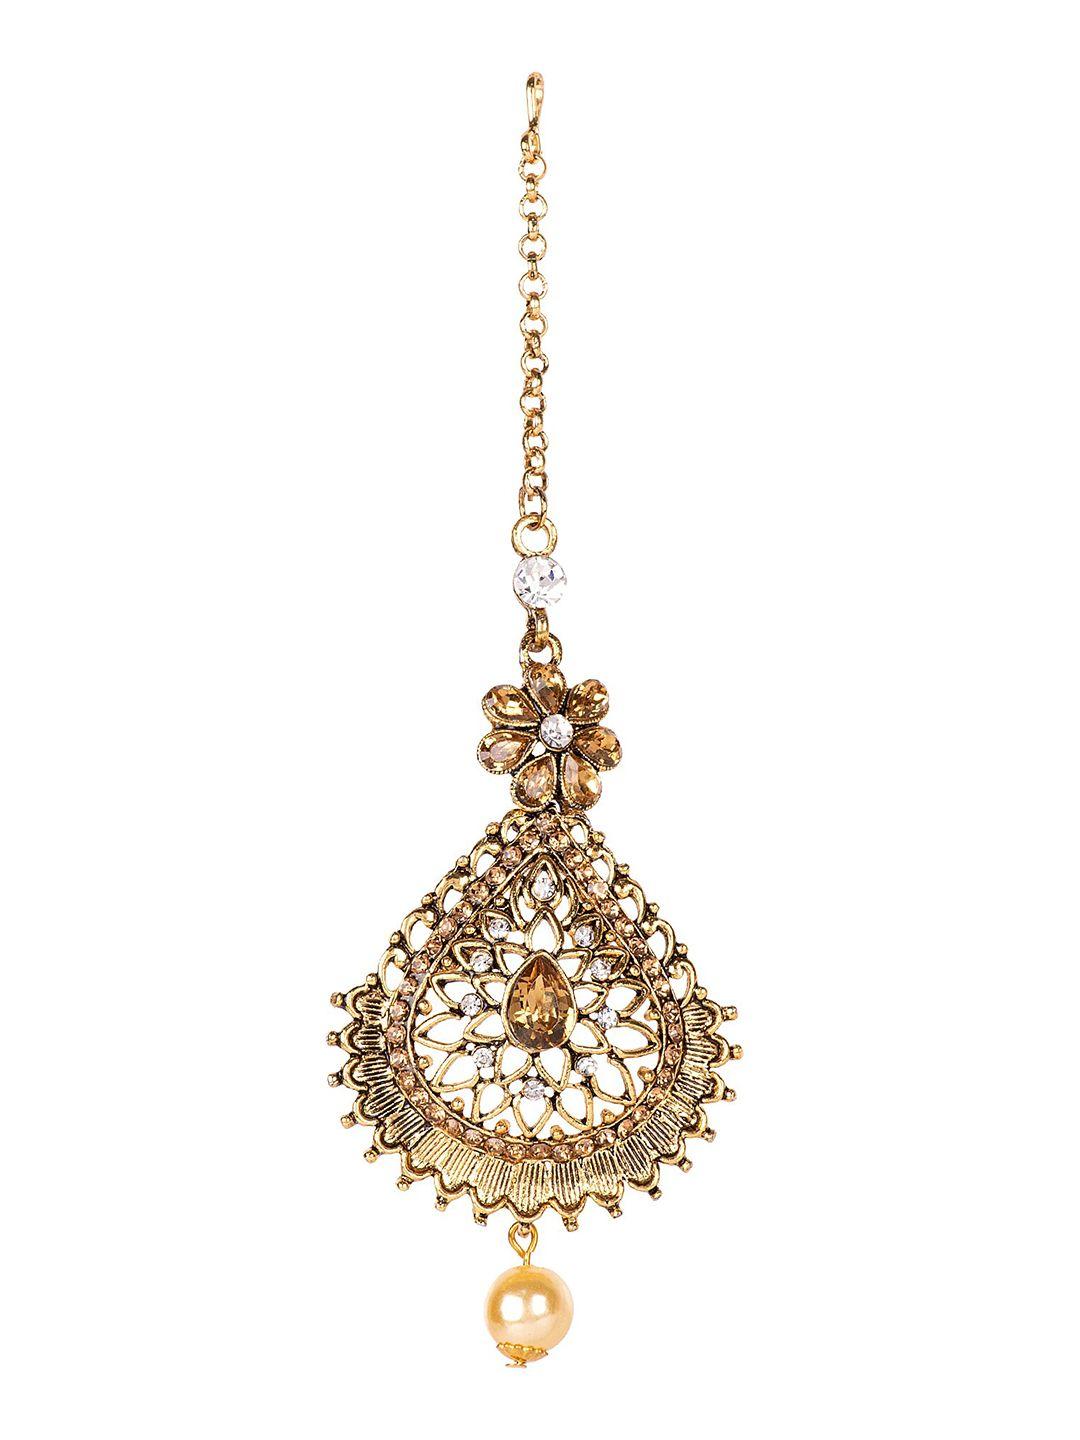 anikas creation gold-plated white stone studded & beaded handcrafted maang tikka